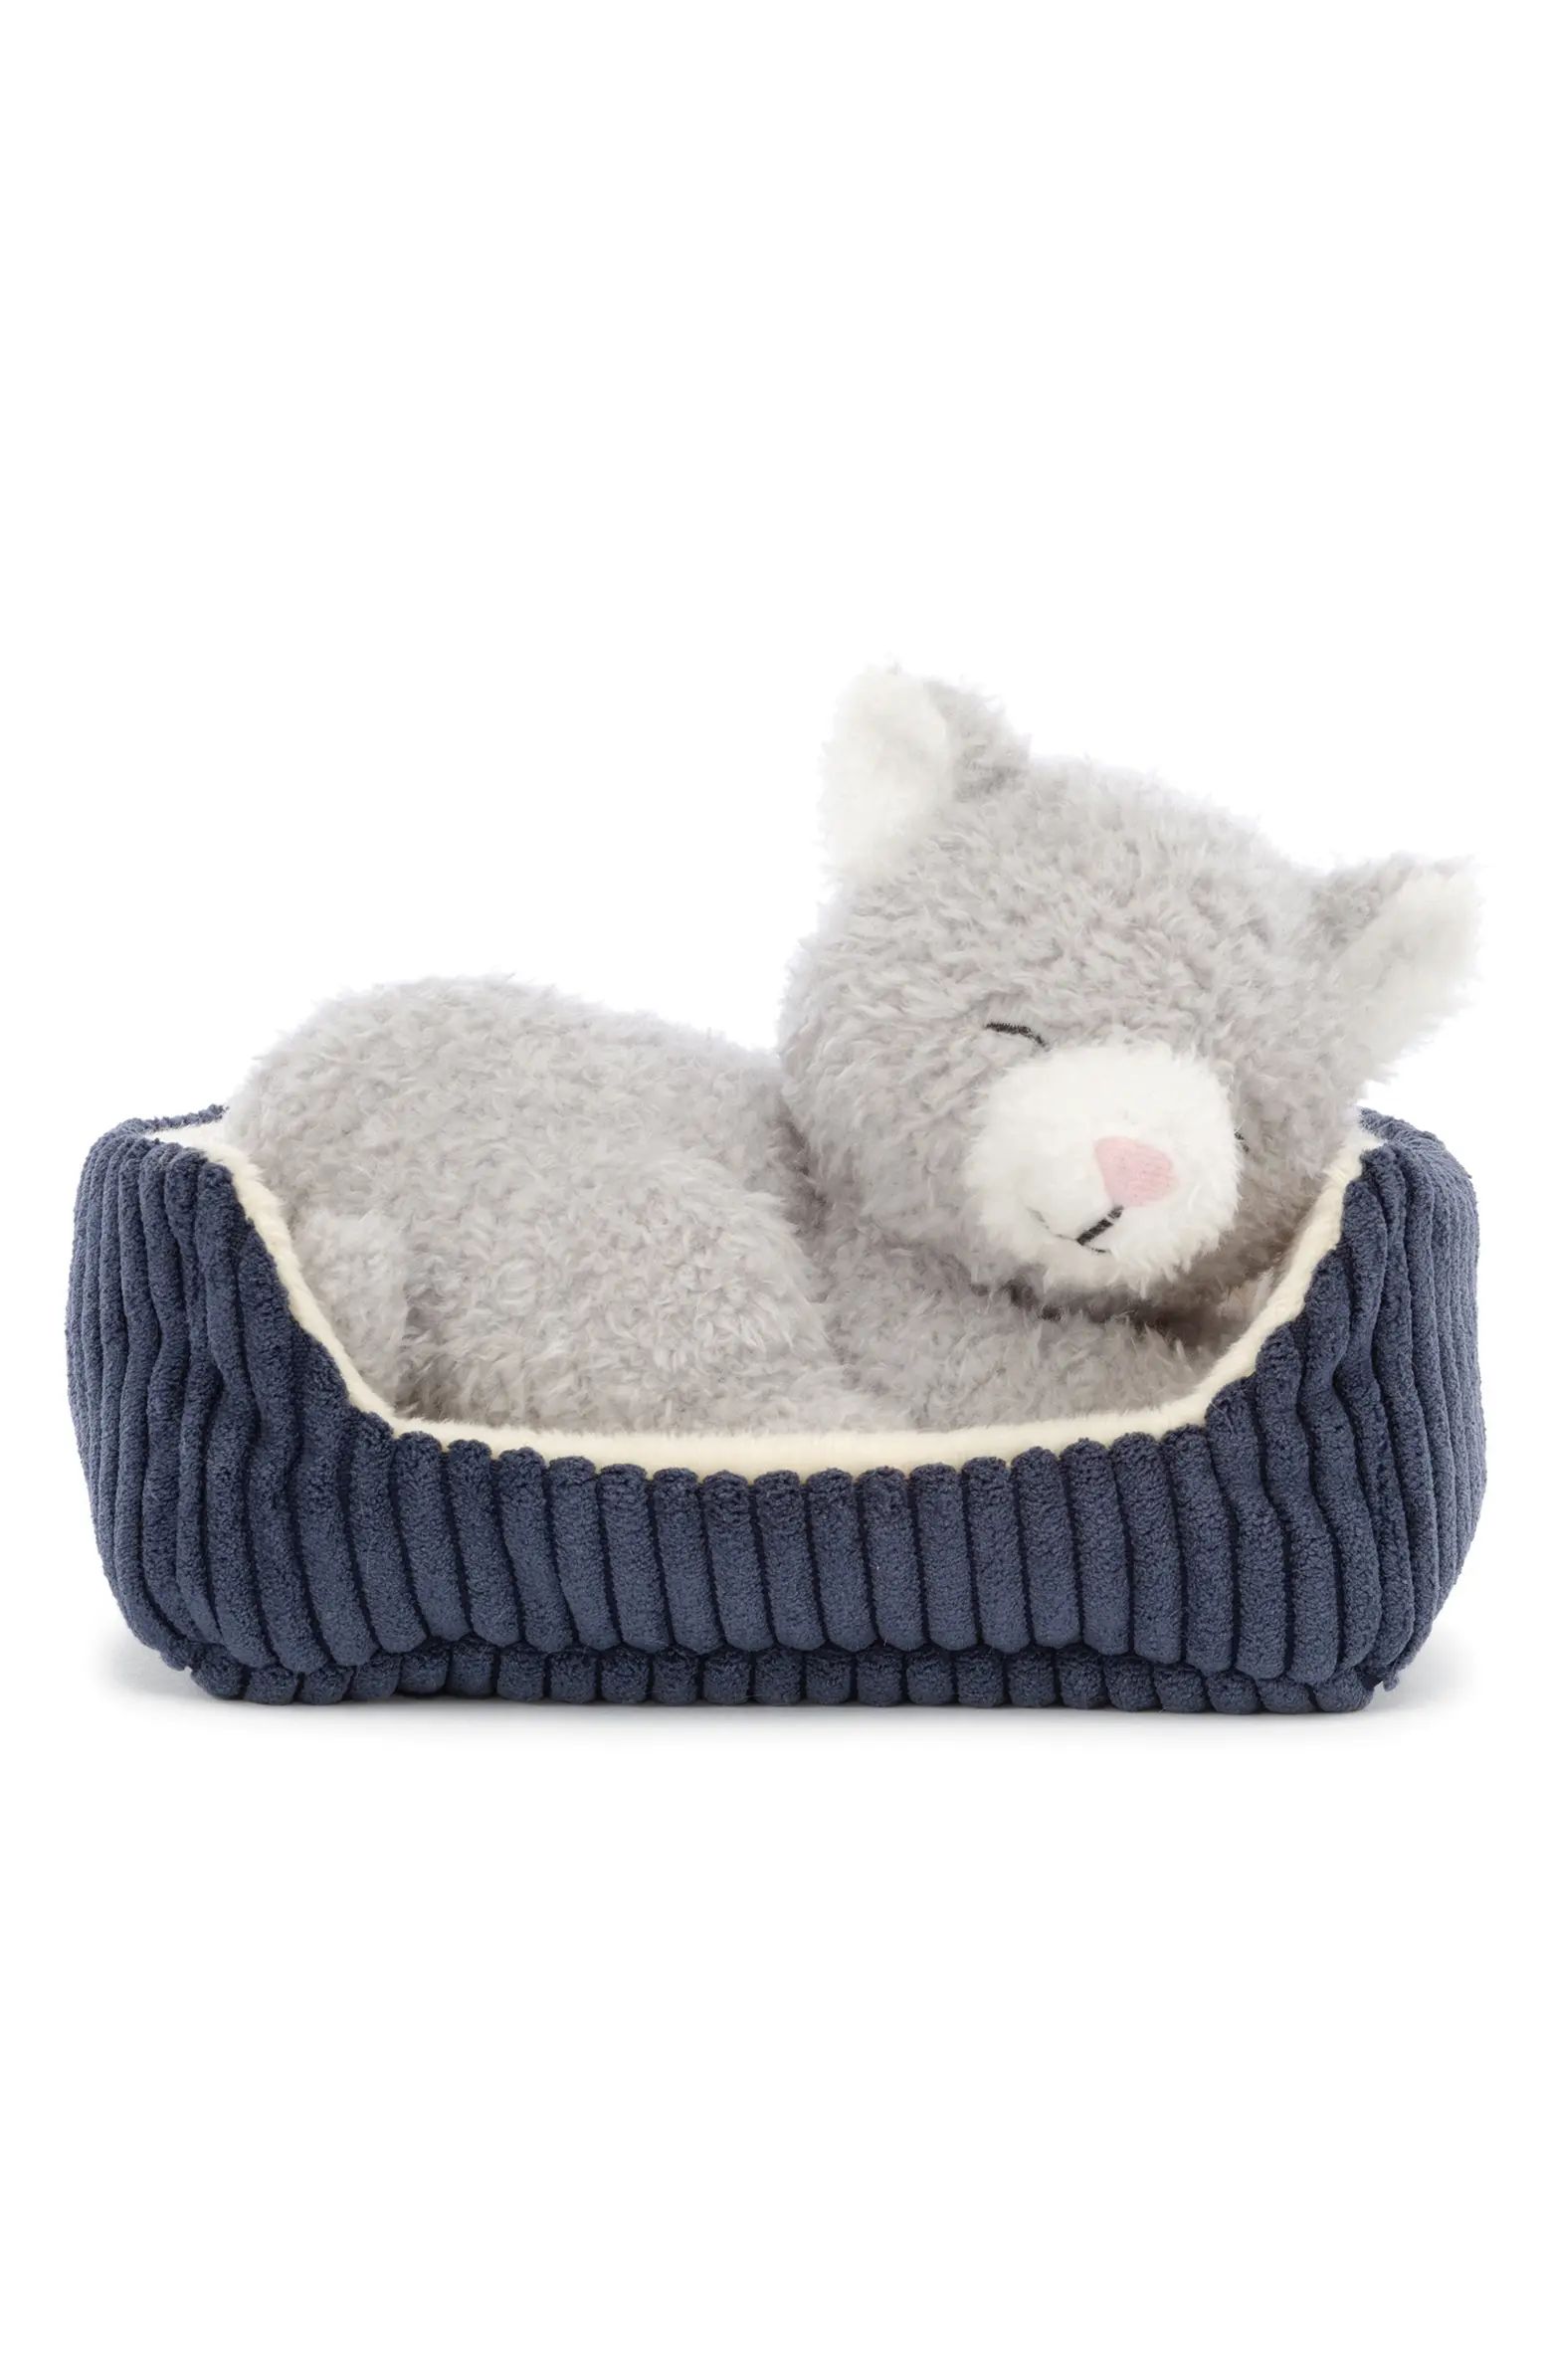 Jellycat Napping Nipper Cat Stuffed Animal | Nordstrom | Nordstrom